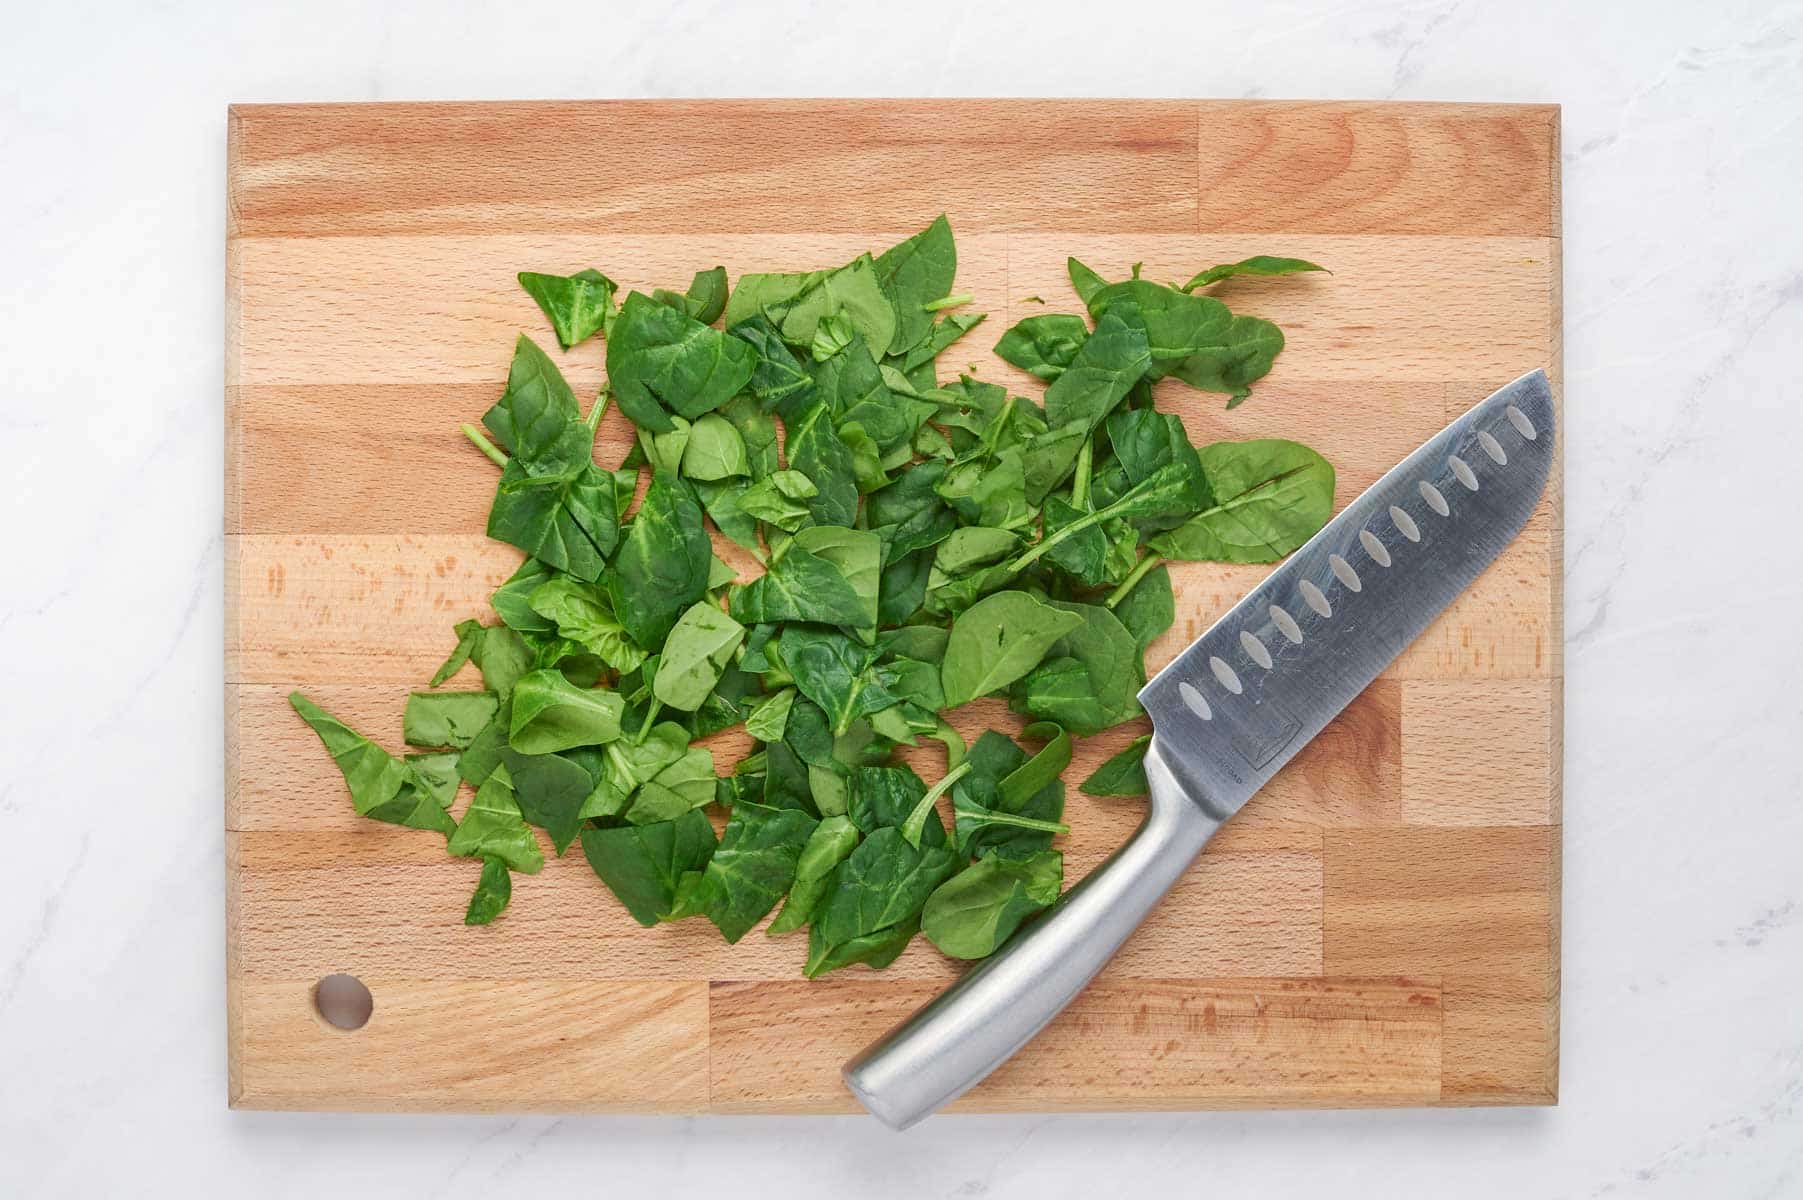 Spinach is chopped on a cutting board.